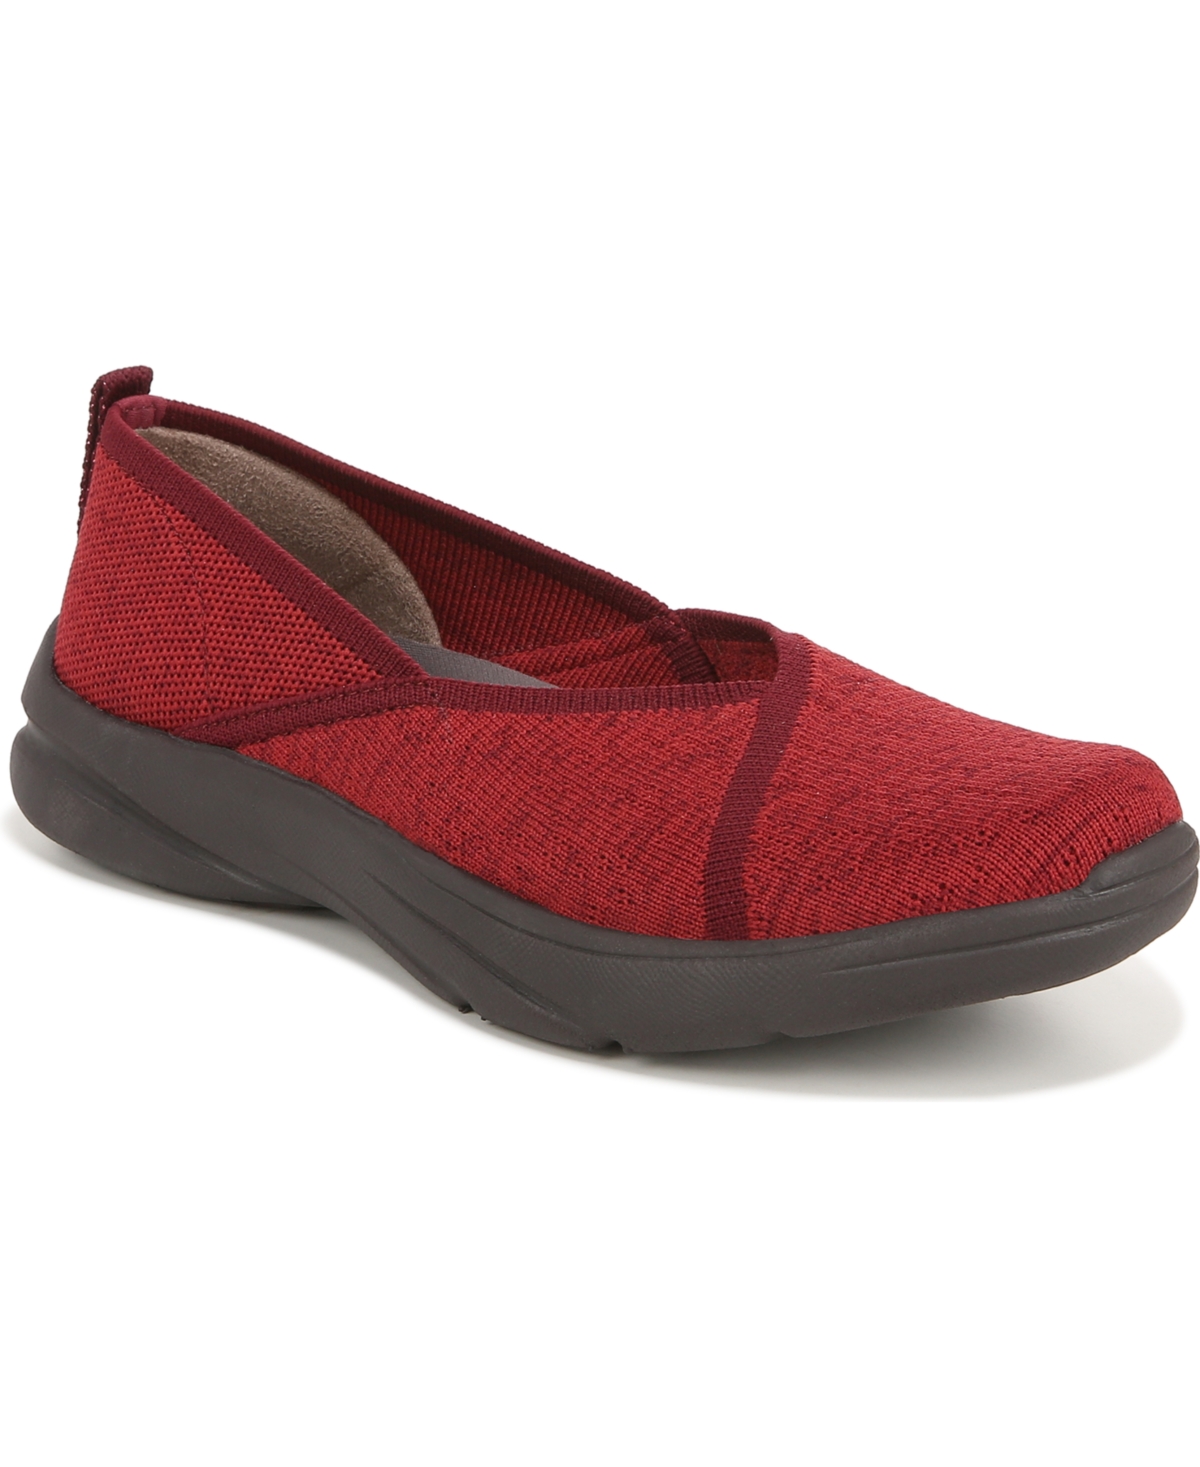 Bzees Premium Legacy Washable Slip-ons In Red Knit Fabric